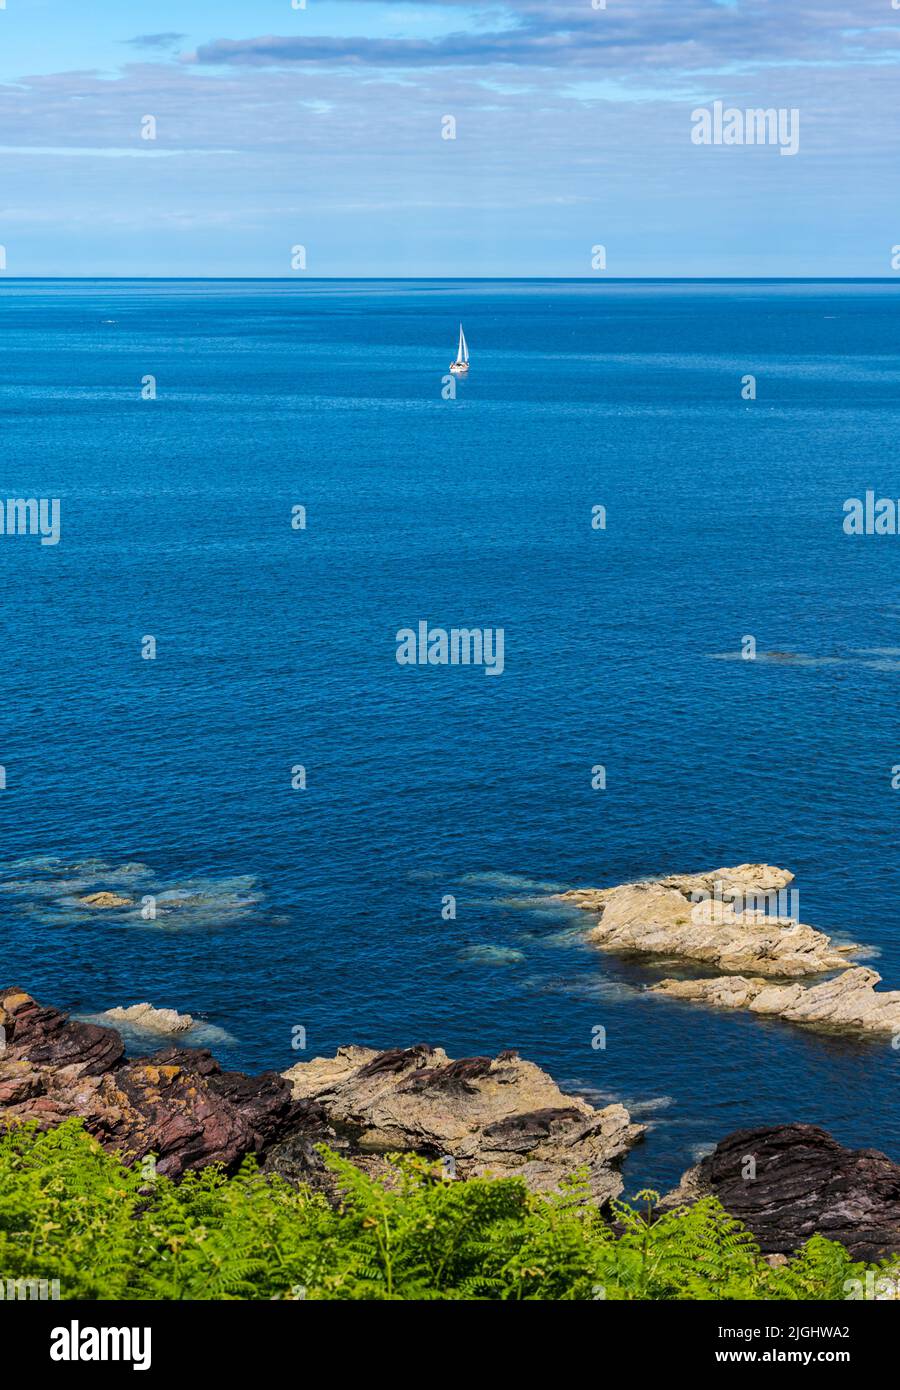 View of a yacht out in the North Sea from the Berwickshire coastline, Scotland, UK Stock Photo